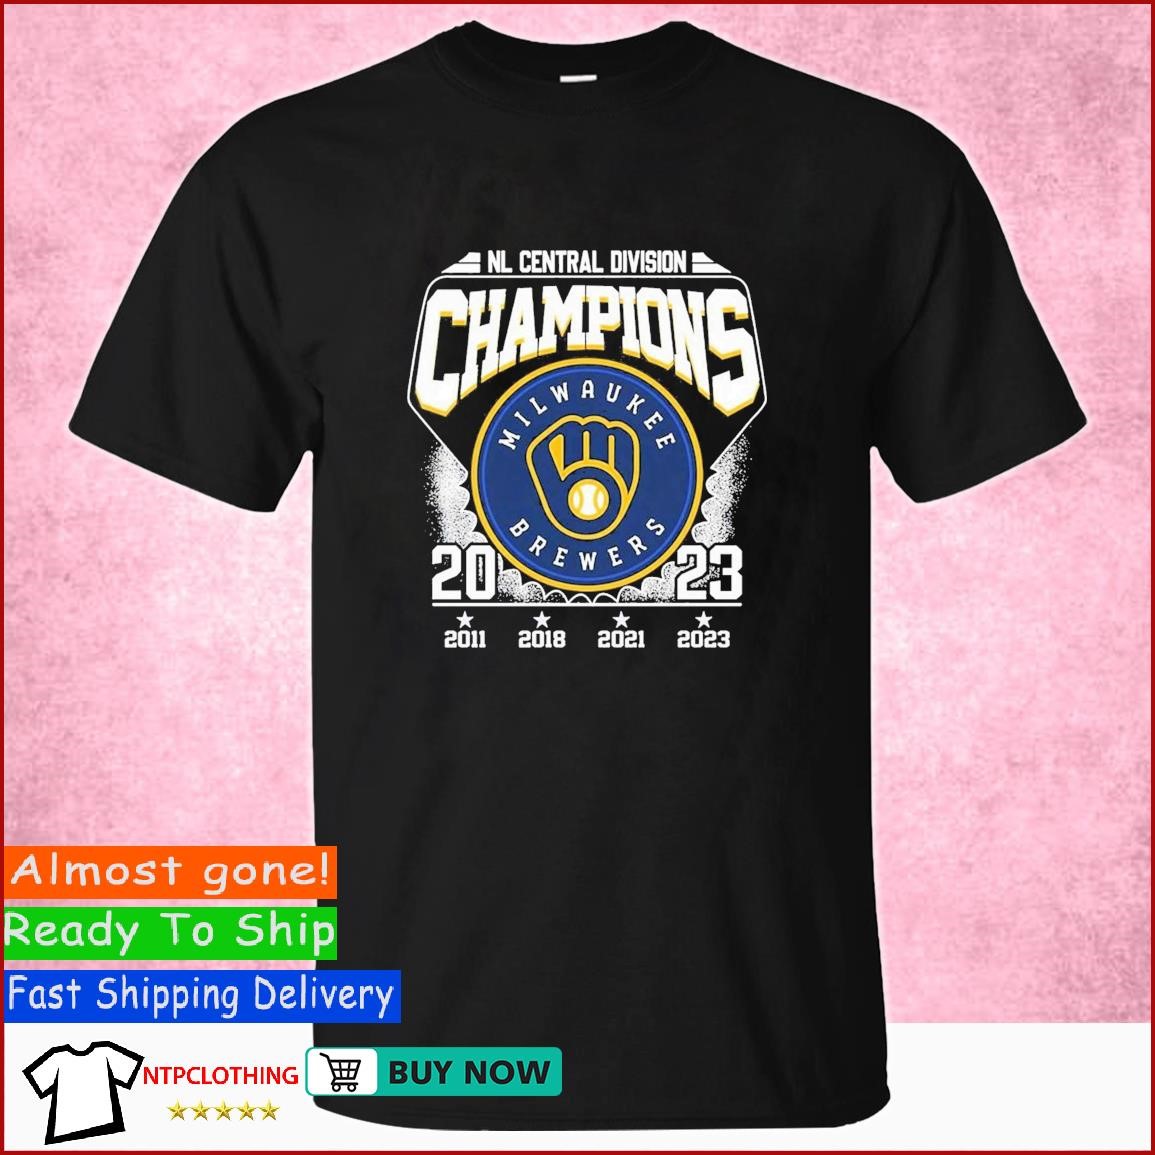 NL Central Divison Champions Milwaukee Brewers 2011 2018 2021 2023